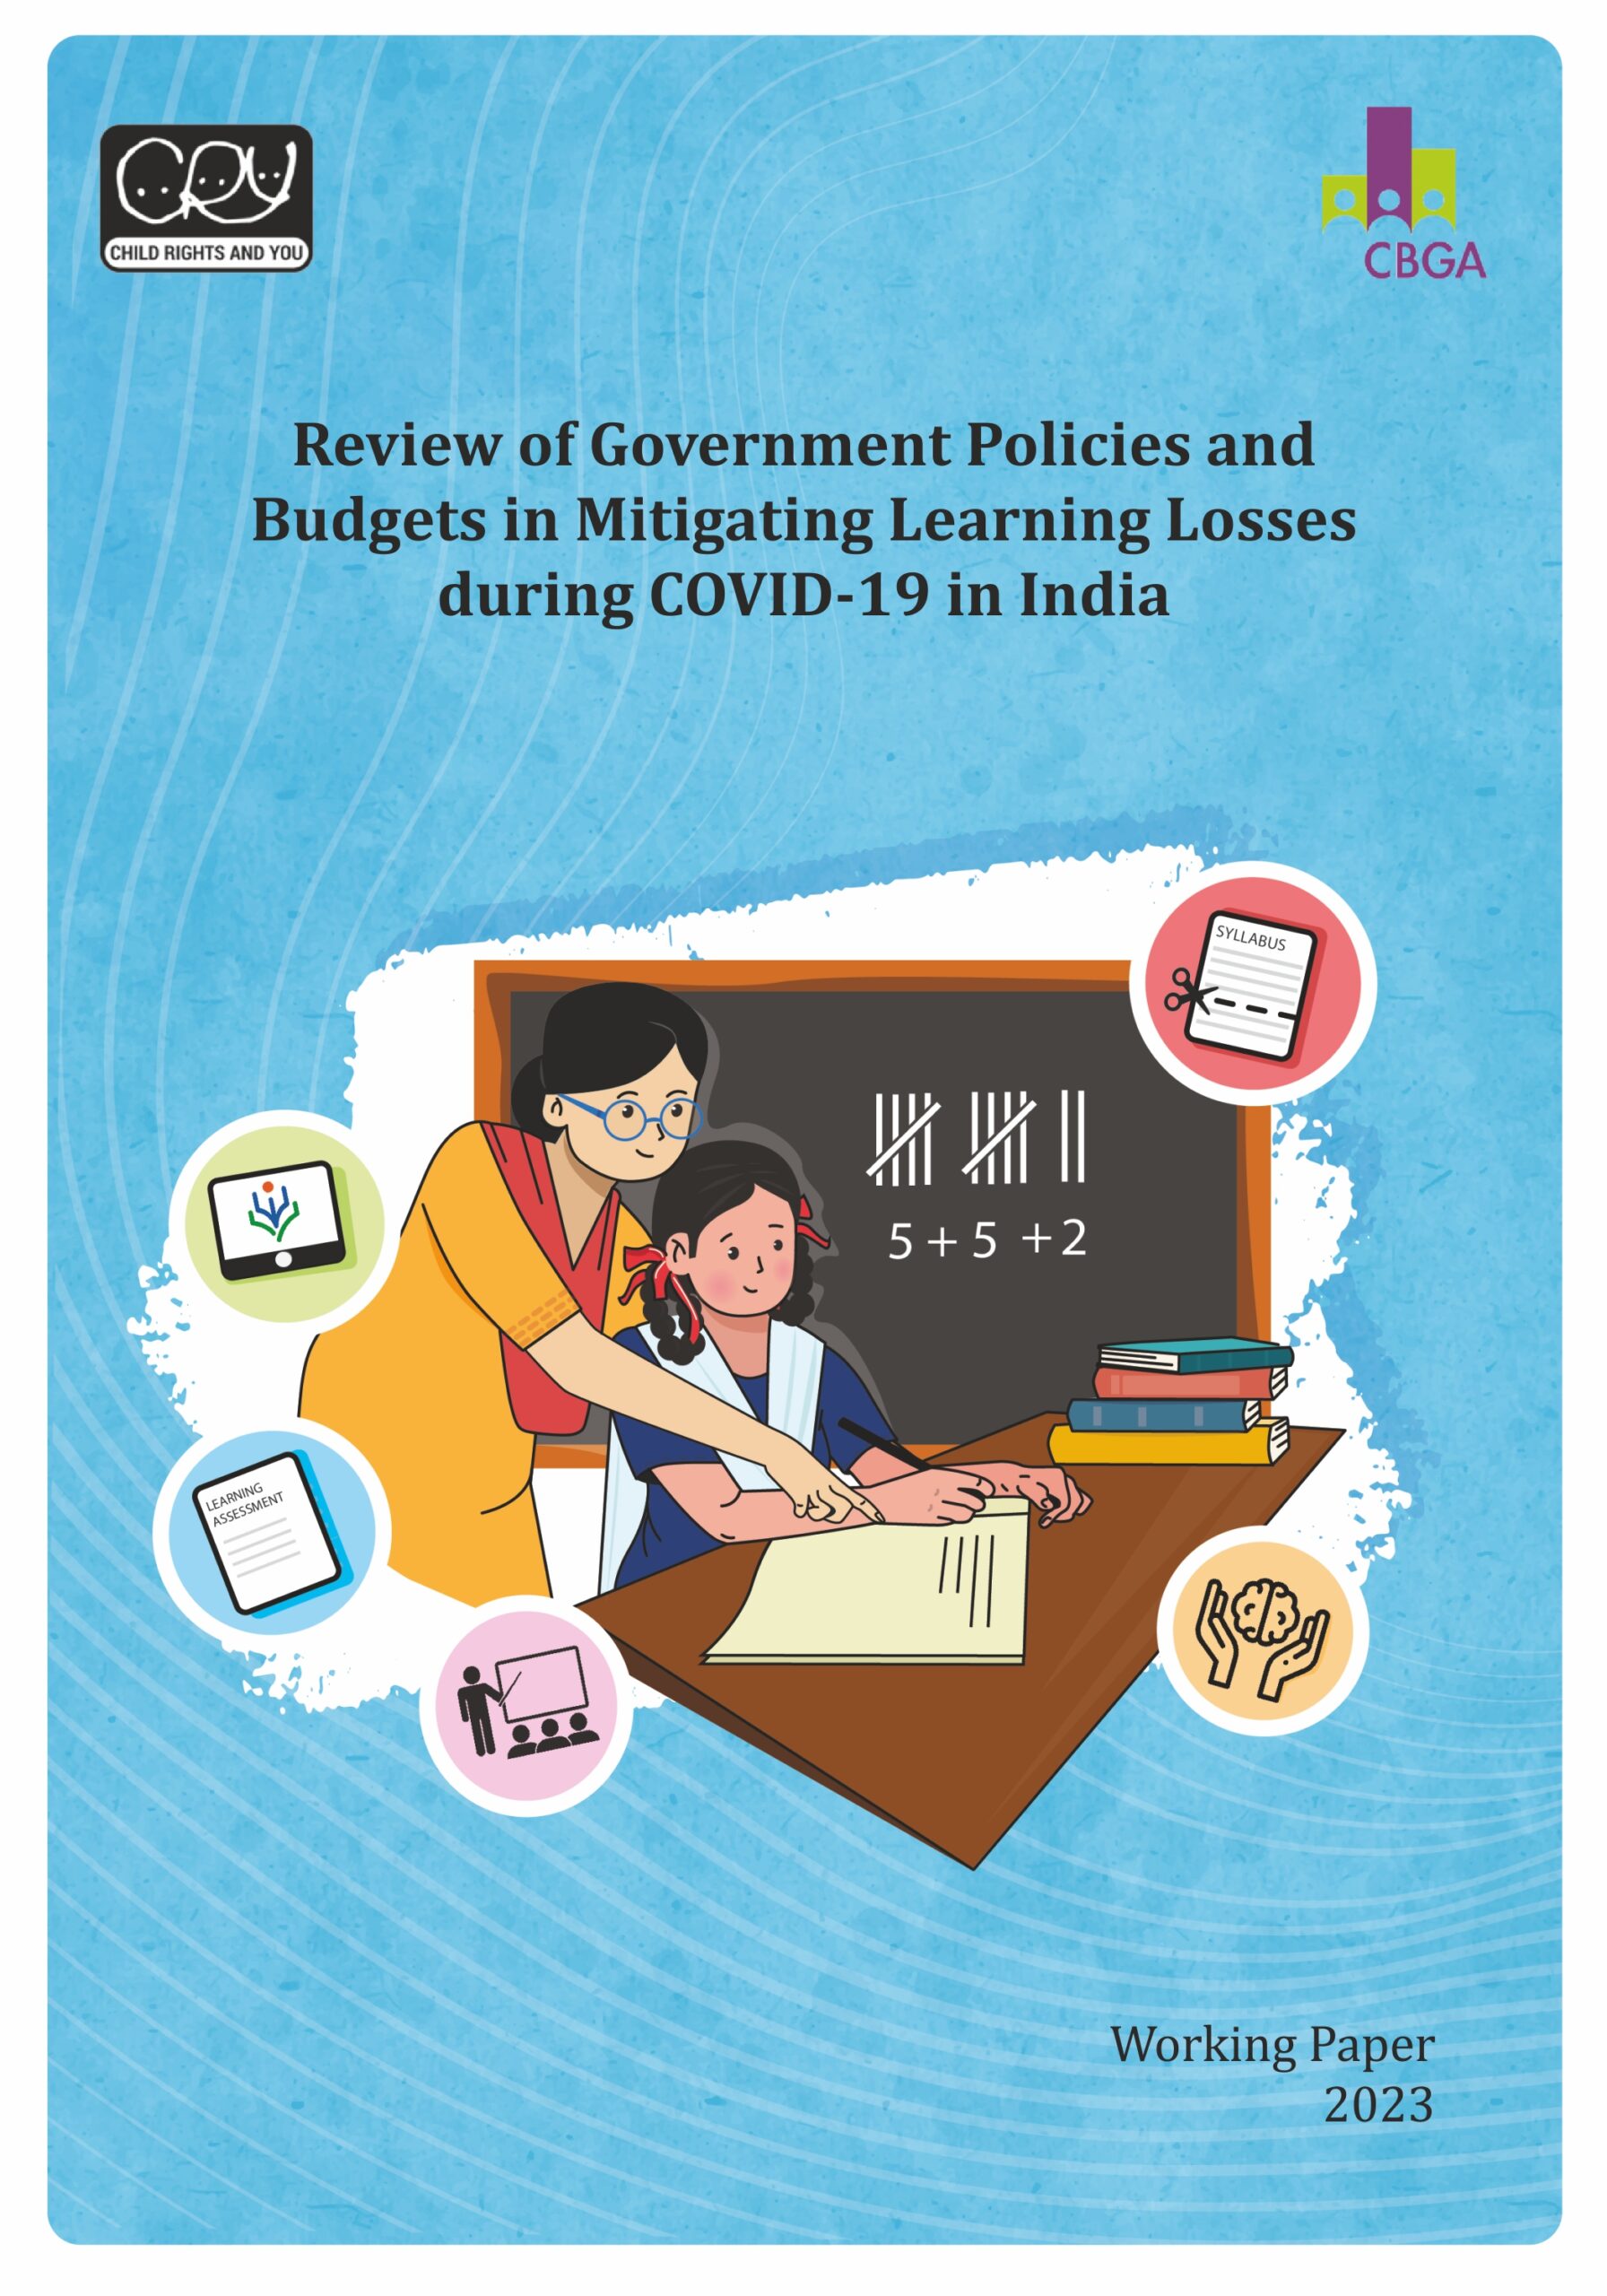 Review of Government Policies and Budgets in Mitigating Learning Losses during COVID-19 in India